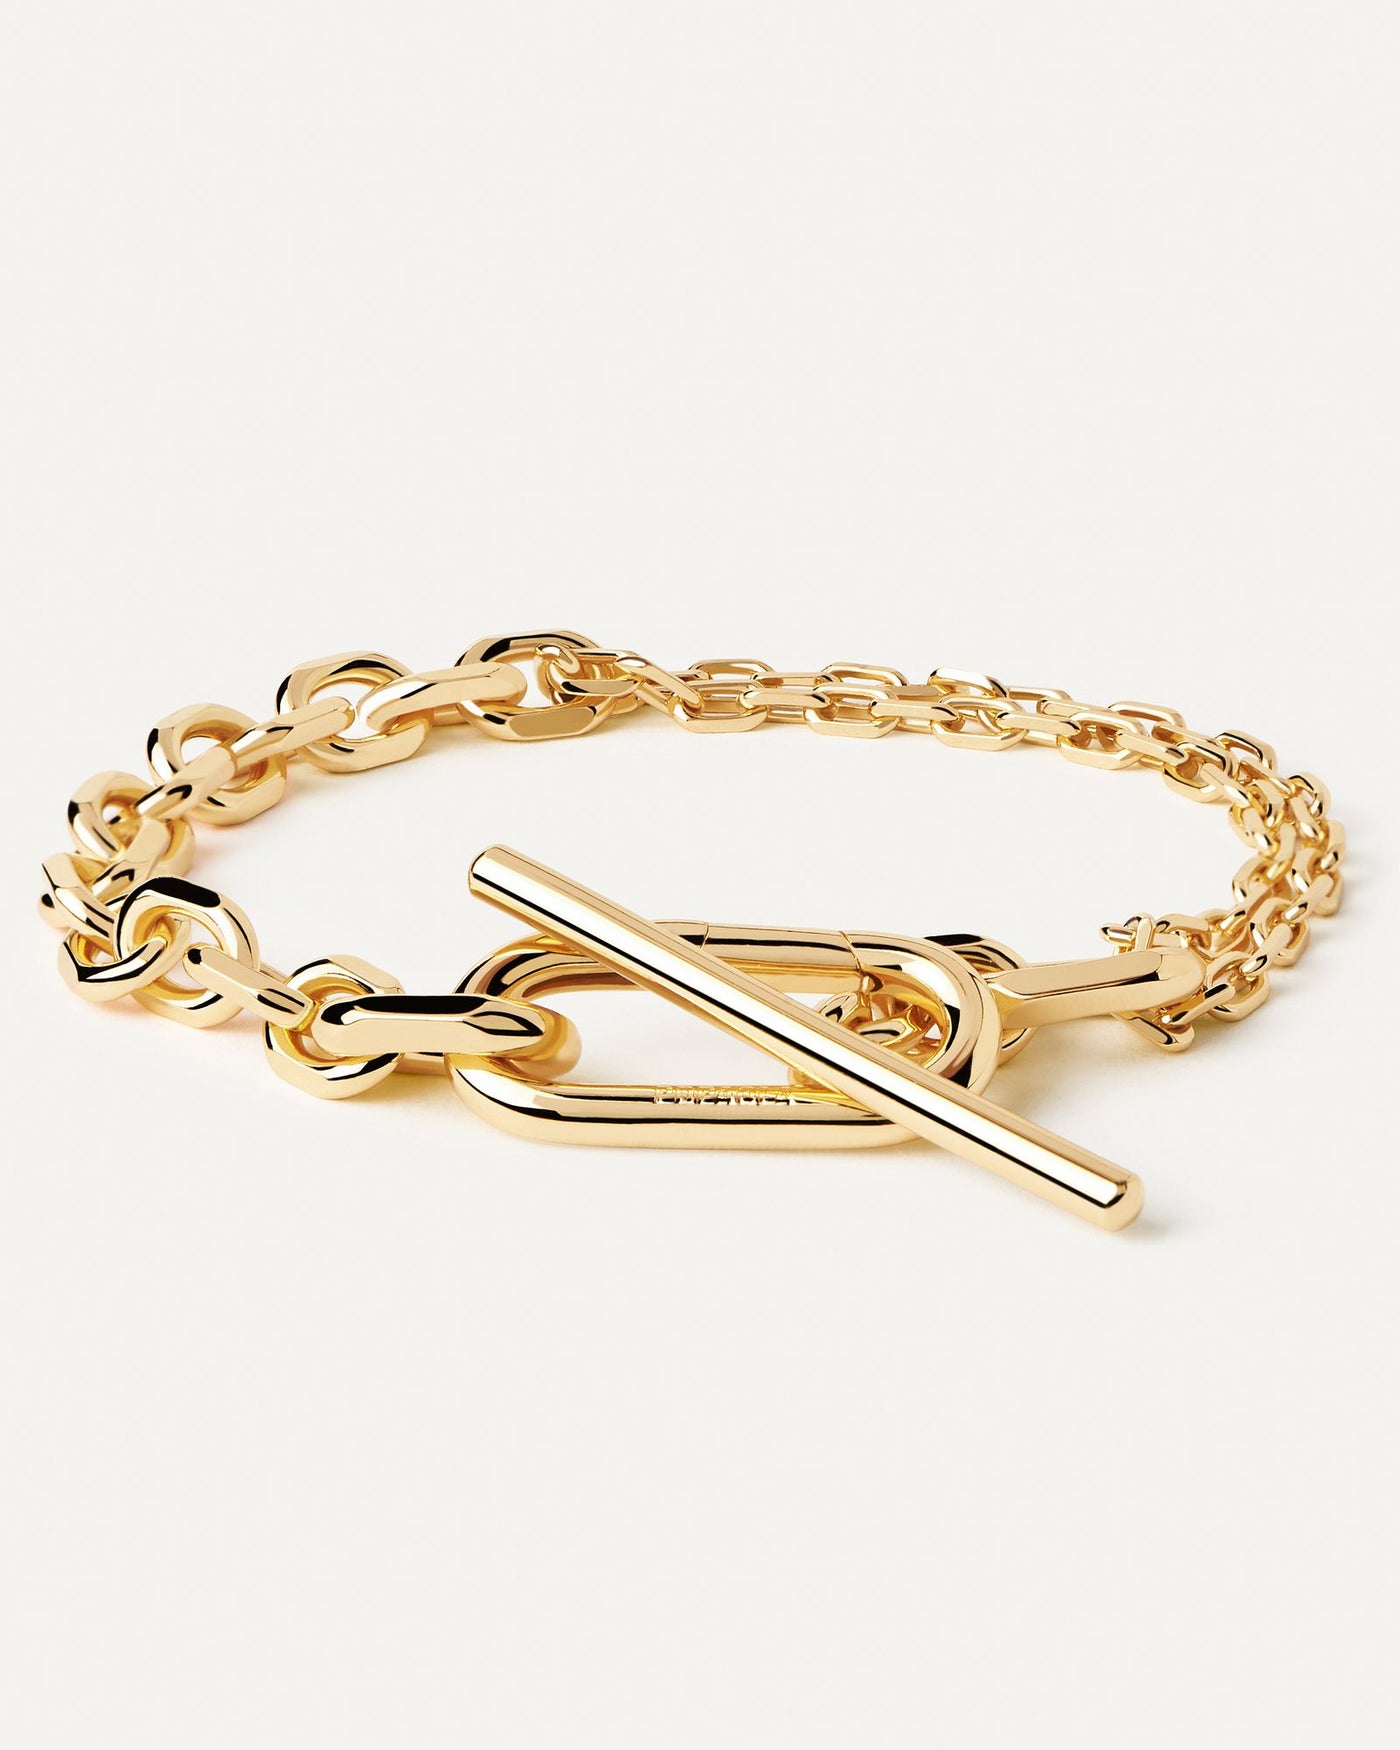 2024 Selection | Vesta Chain Bracelet. Gold-plated double chain T-bar bracelet with bold clasp and asymmetrical links. Get the latest arrival from PDPAOLA. Place your order safely and get this Best Seller. Free Shipping.